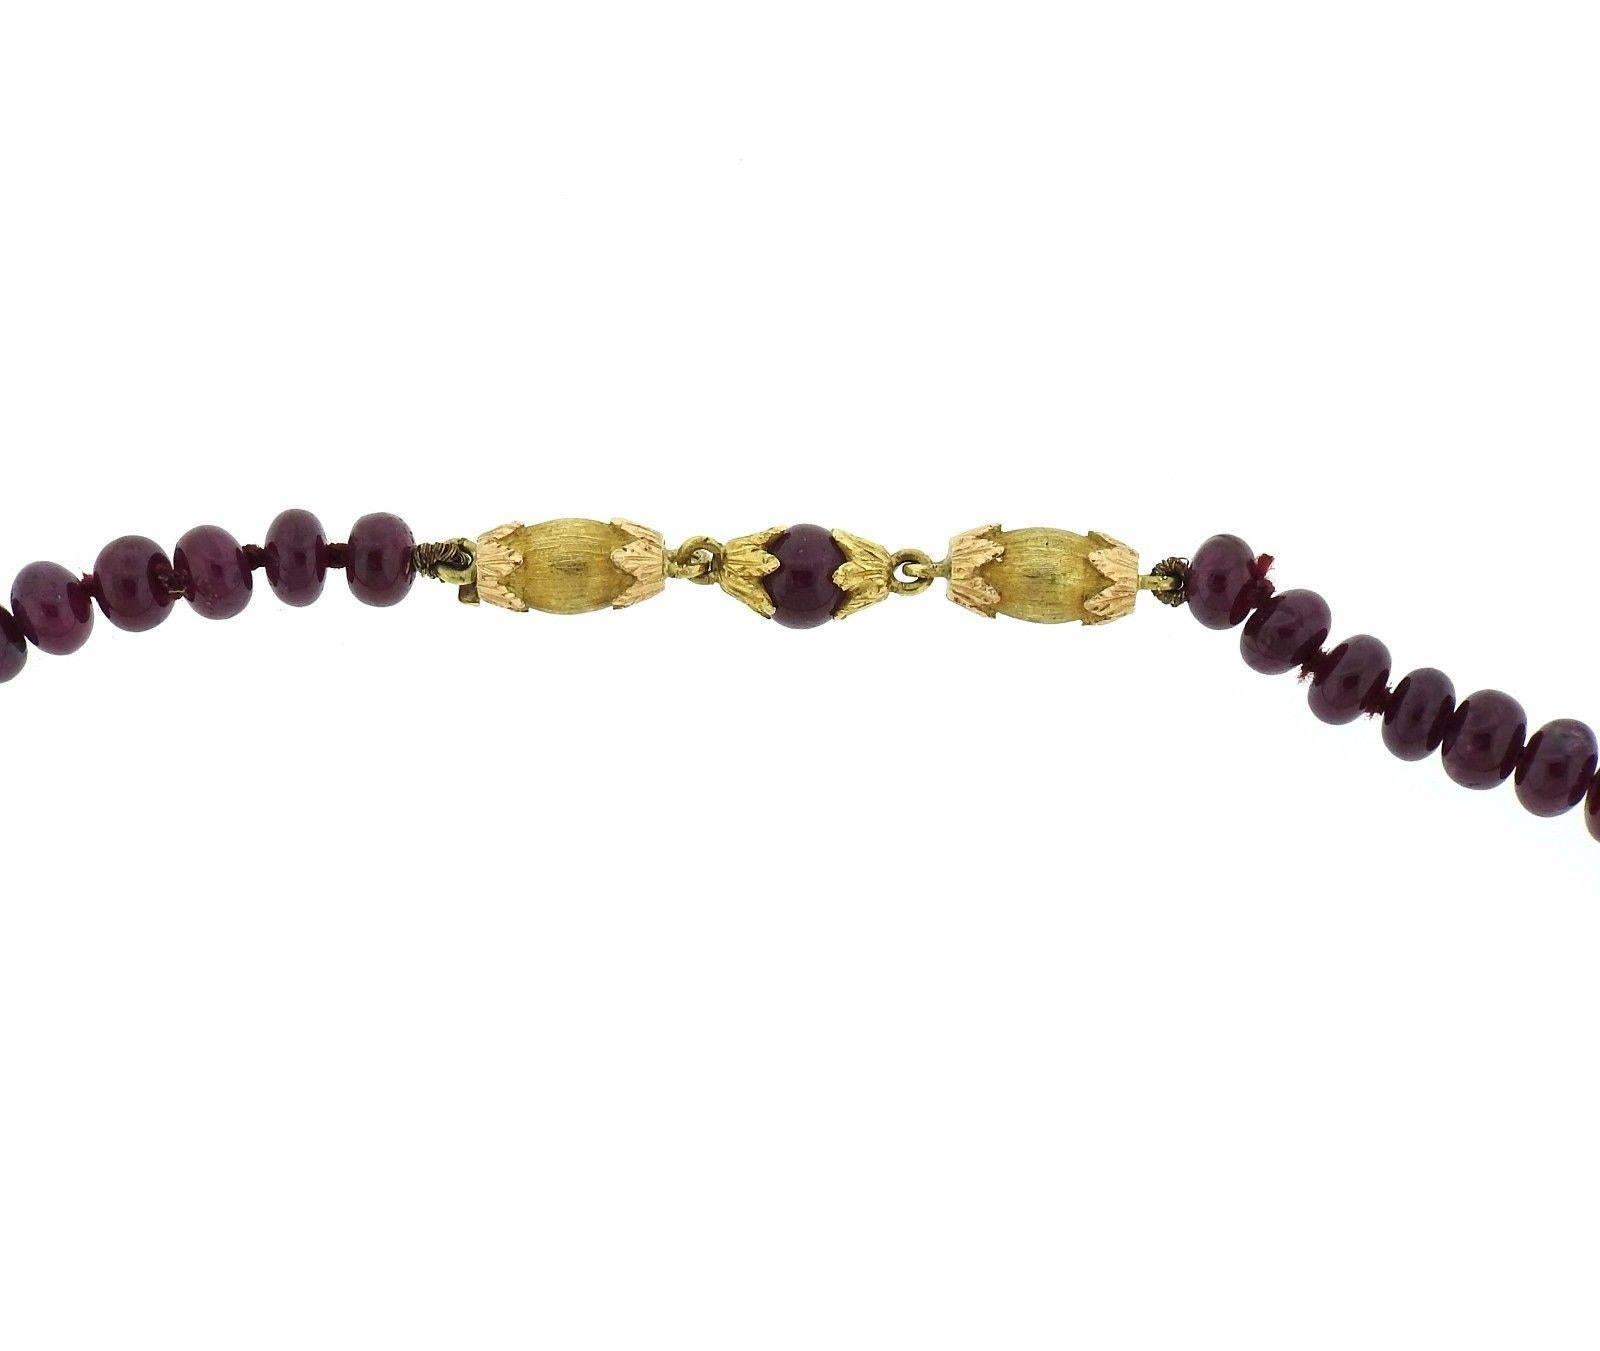 An 18k yellow gold necklace set with 5mm - 5.5mm ruby beads.  The necklace is 19 3/8